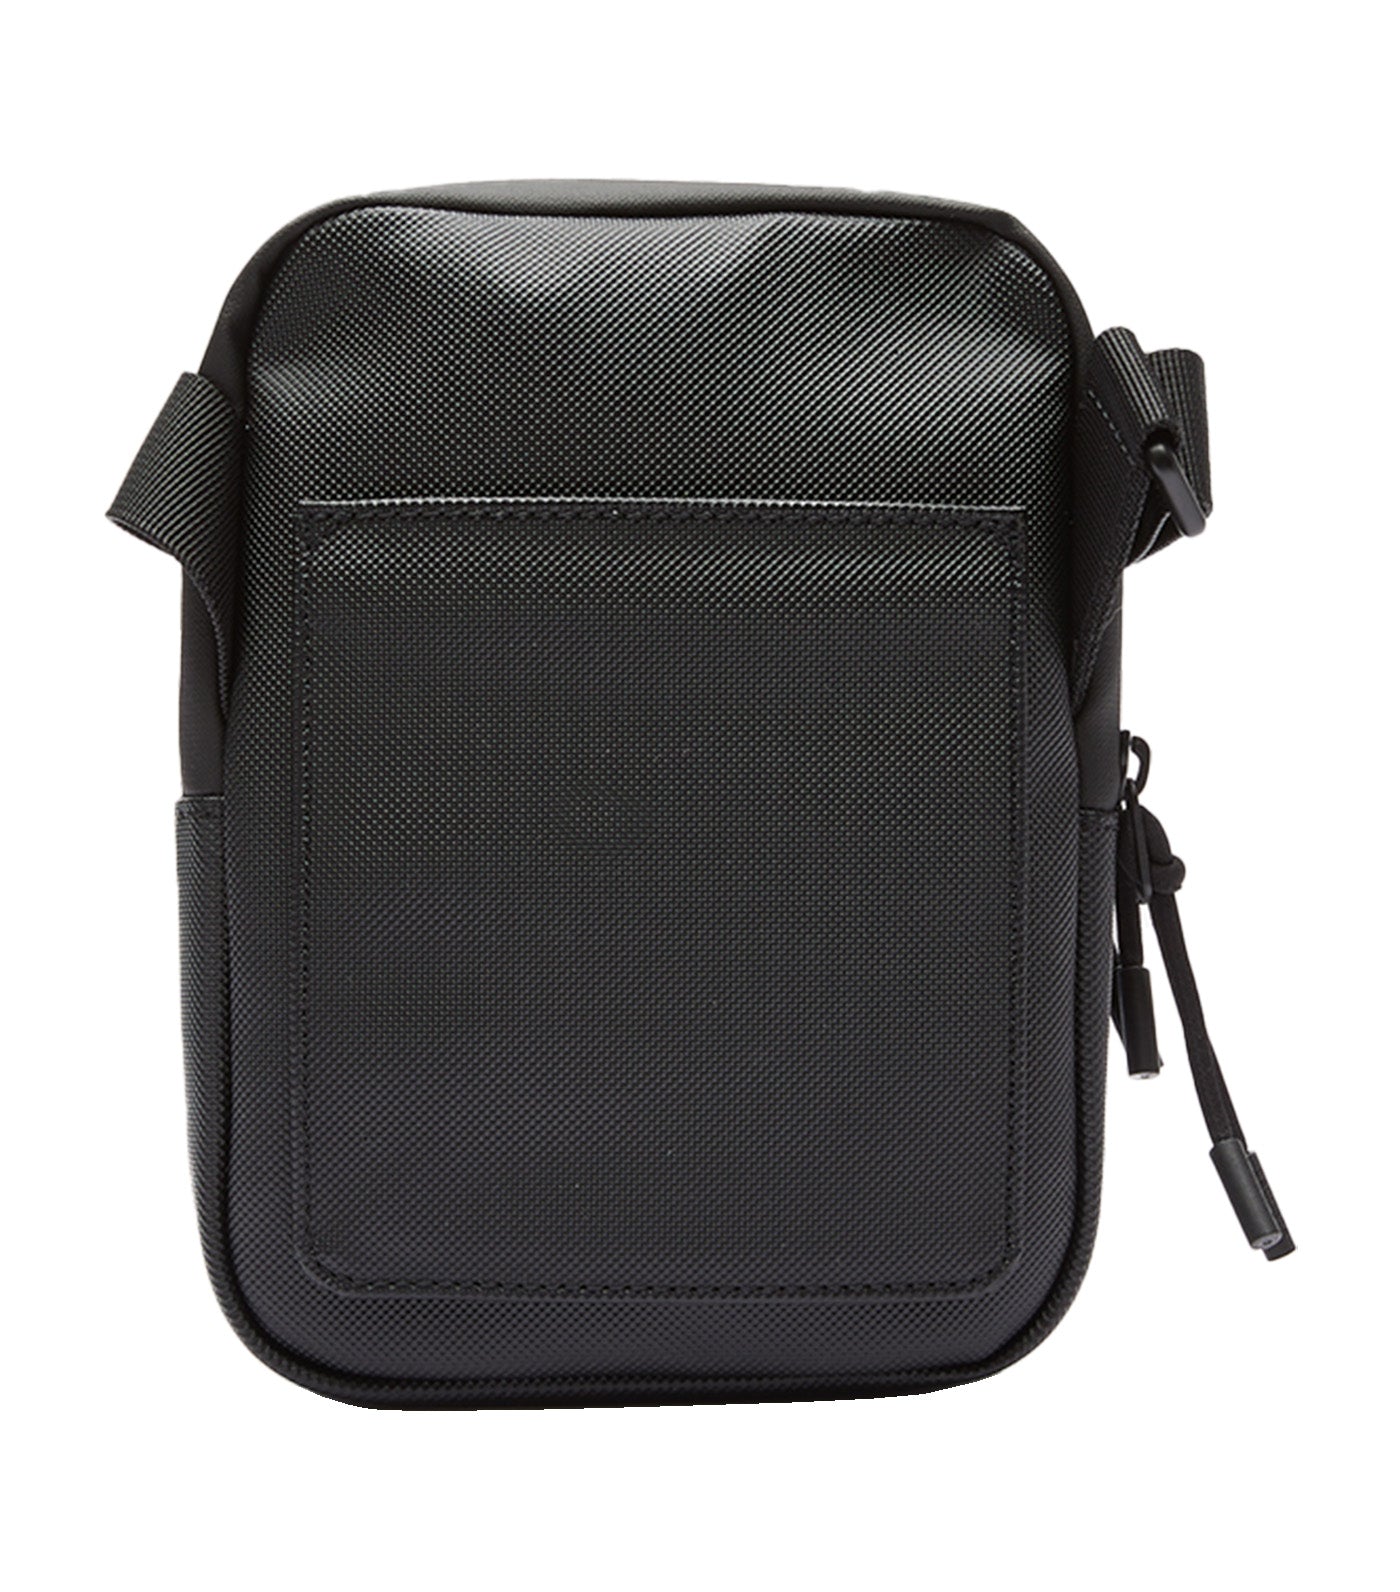 Men's Coated Canvas Small Crossover Bag Noir